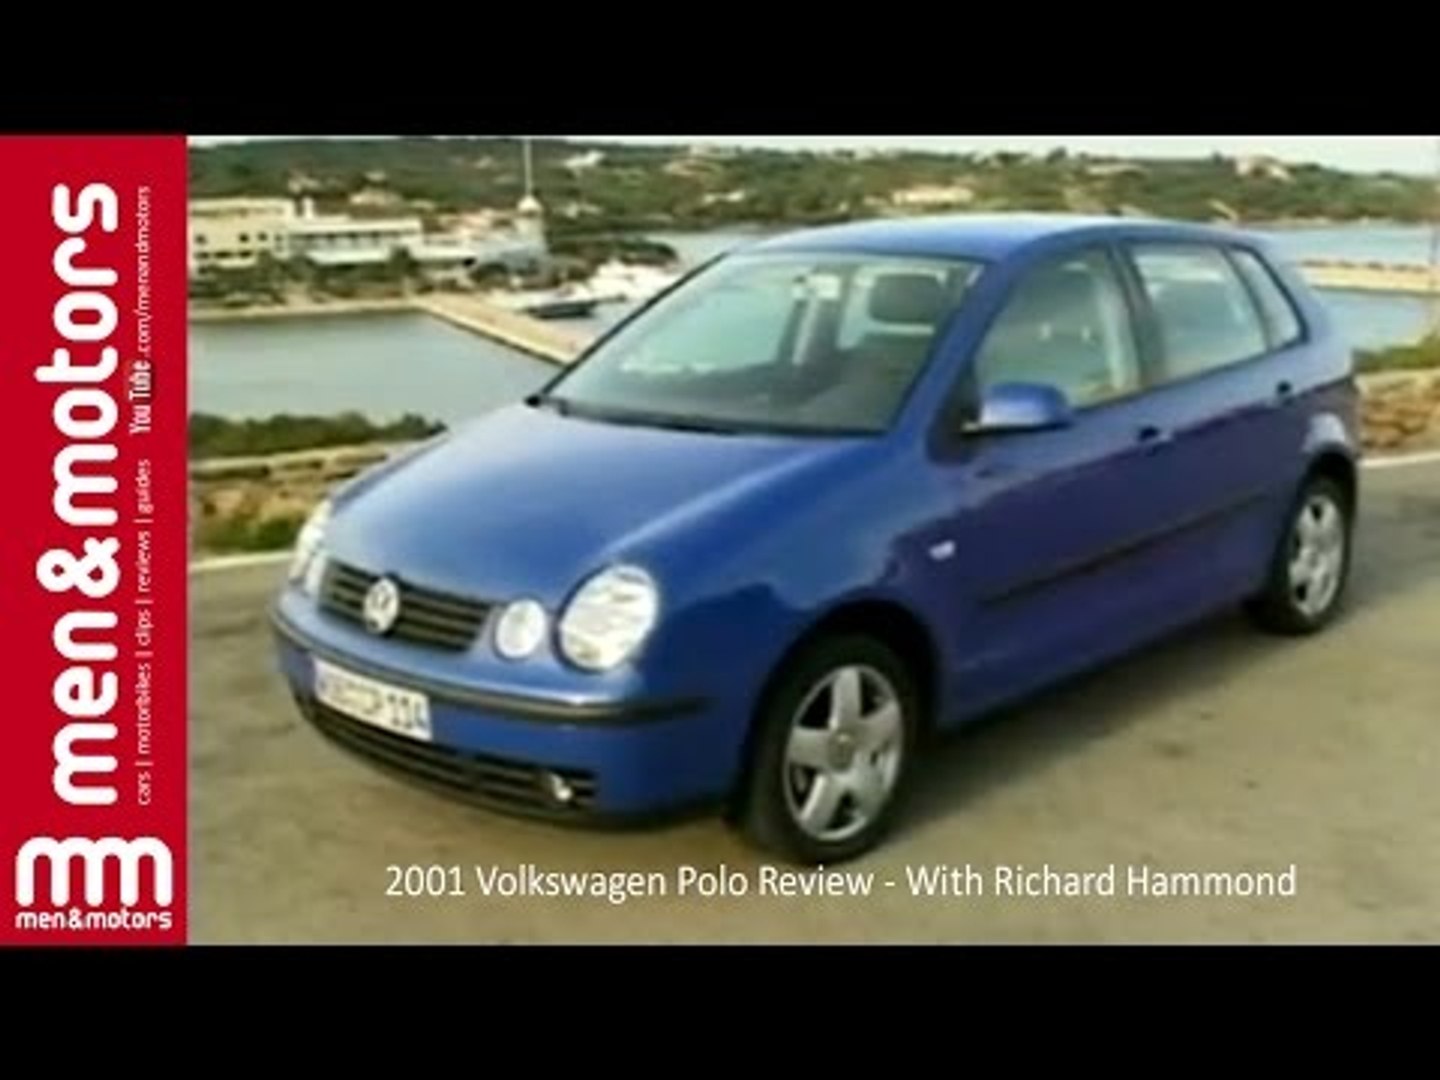 2001 Volkswagen Polo Review - With Richard Hammond - video Dailymotion